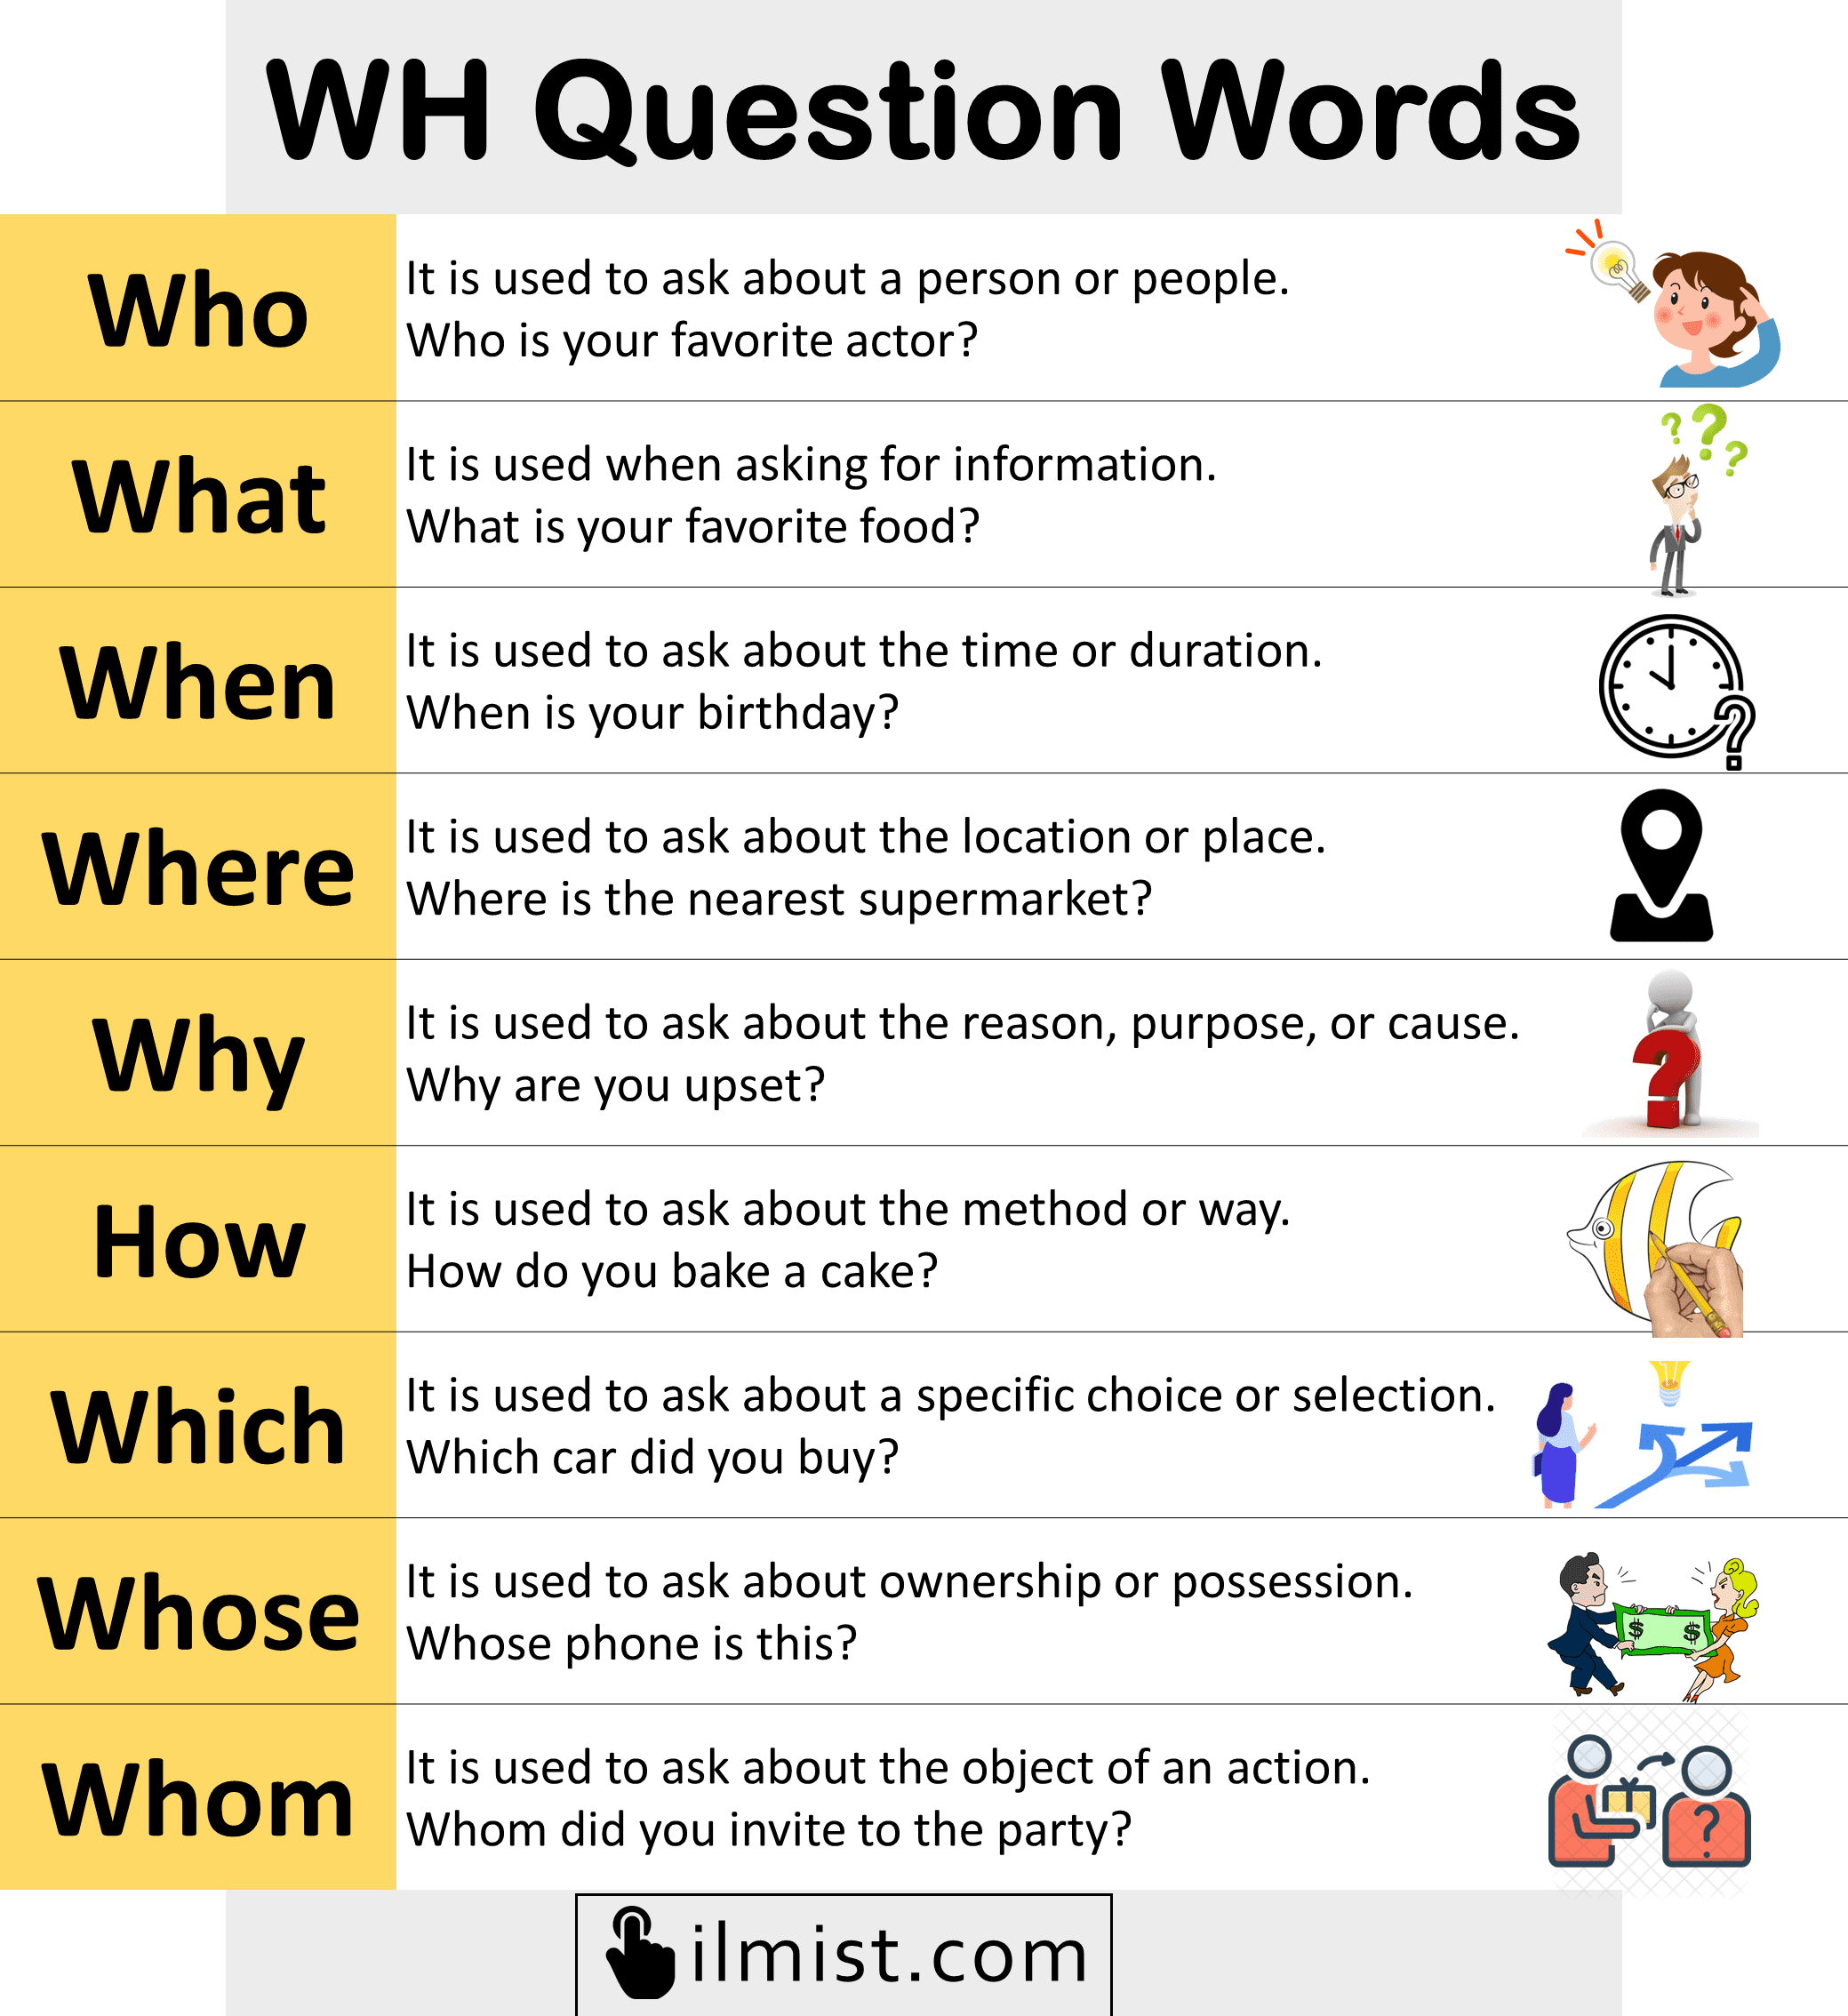 WH Question Words in English Uses and Examples - ilmist